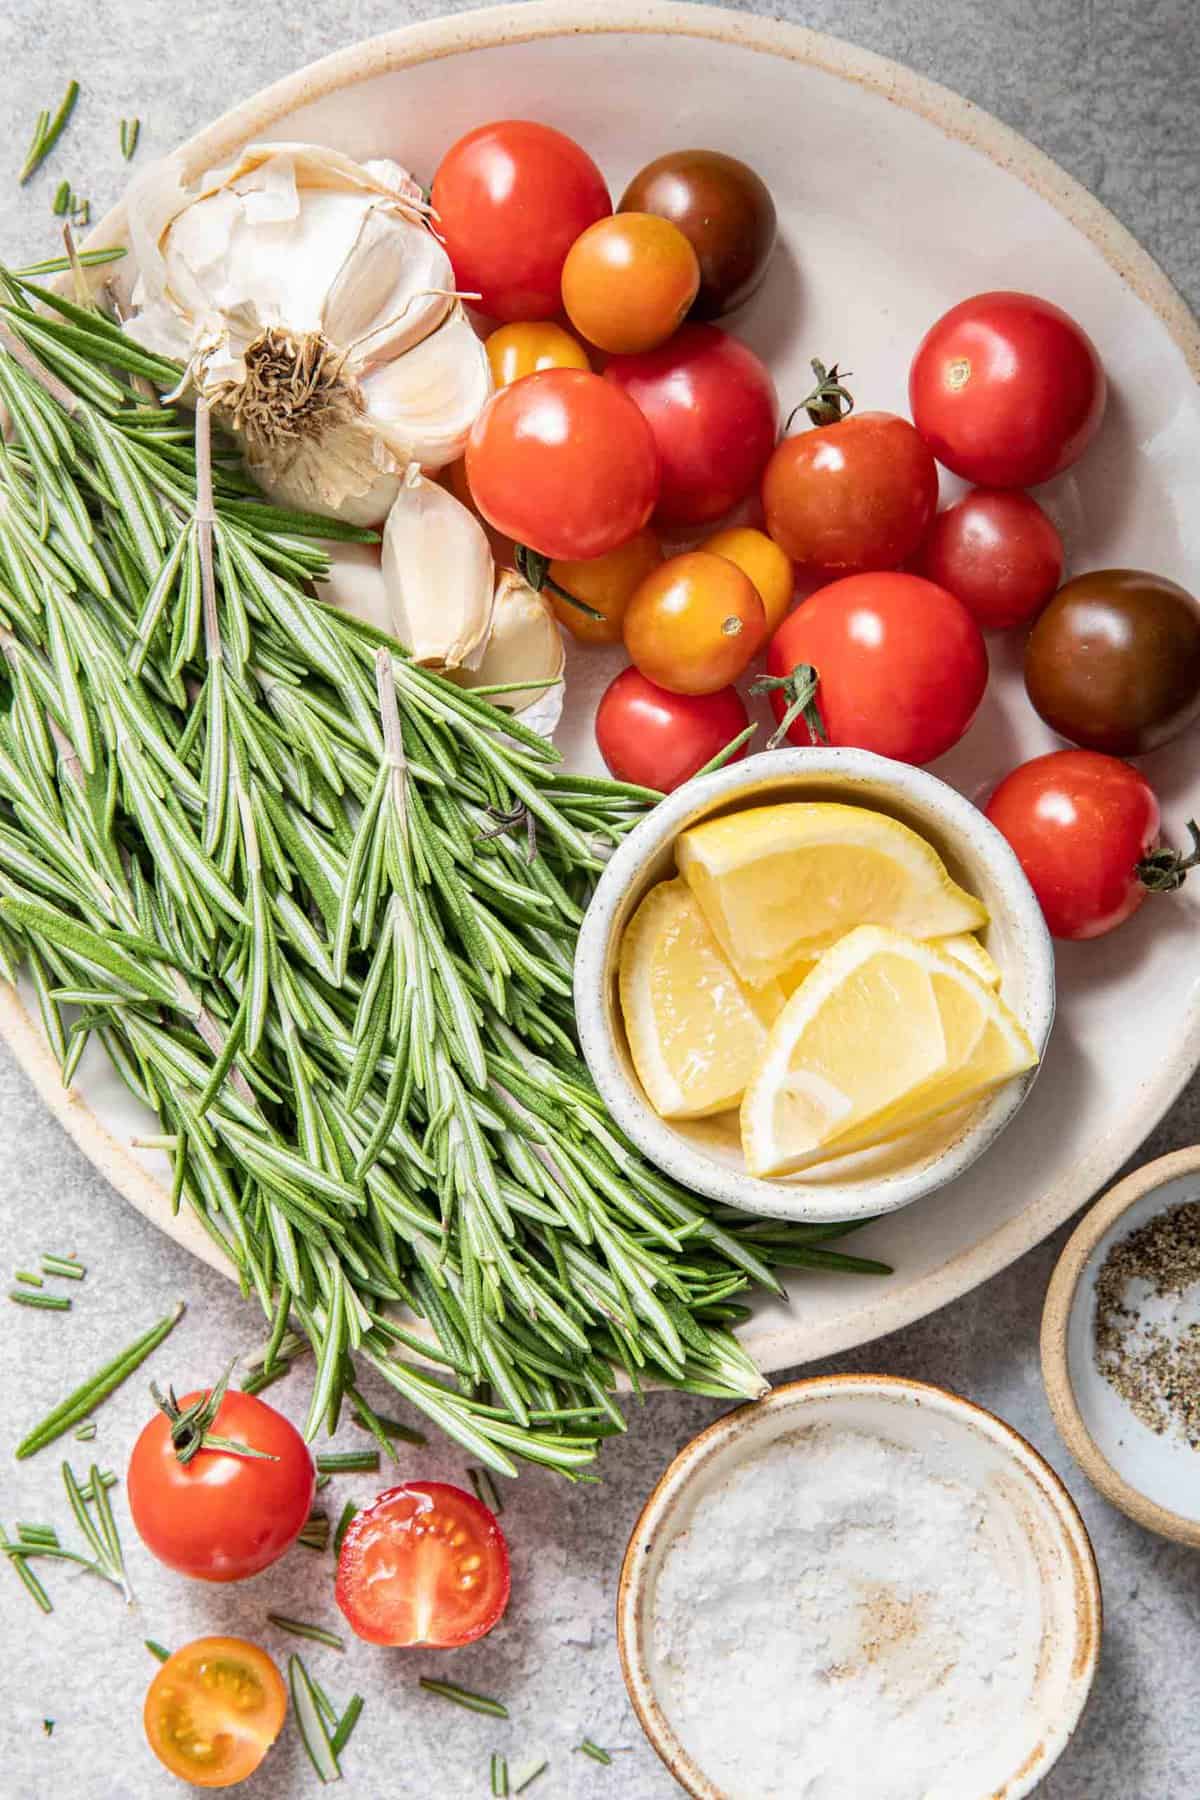 8 Best Substitutes for Rosemary - The Spice House